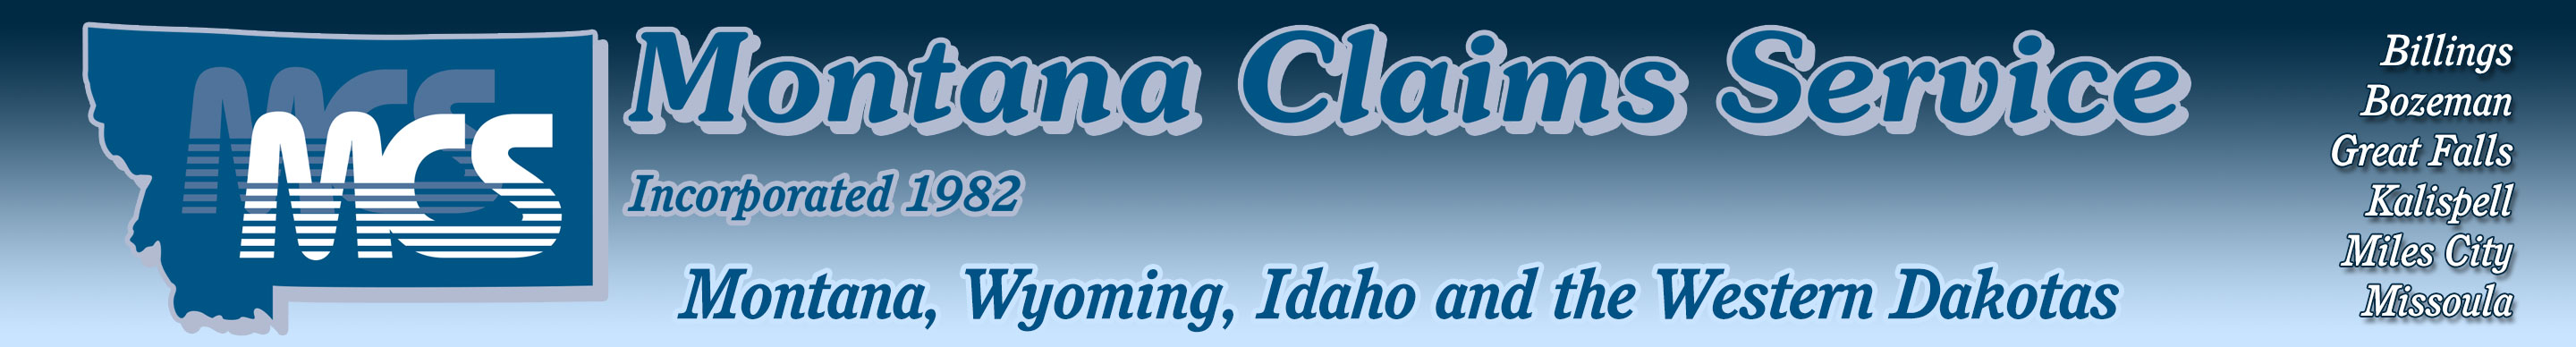 Montana Claims Service The premier multi-line insurance claims adjusting firm serving the states of Montana, Wyoming, Idaho and the Western Dakotas.